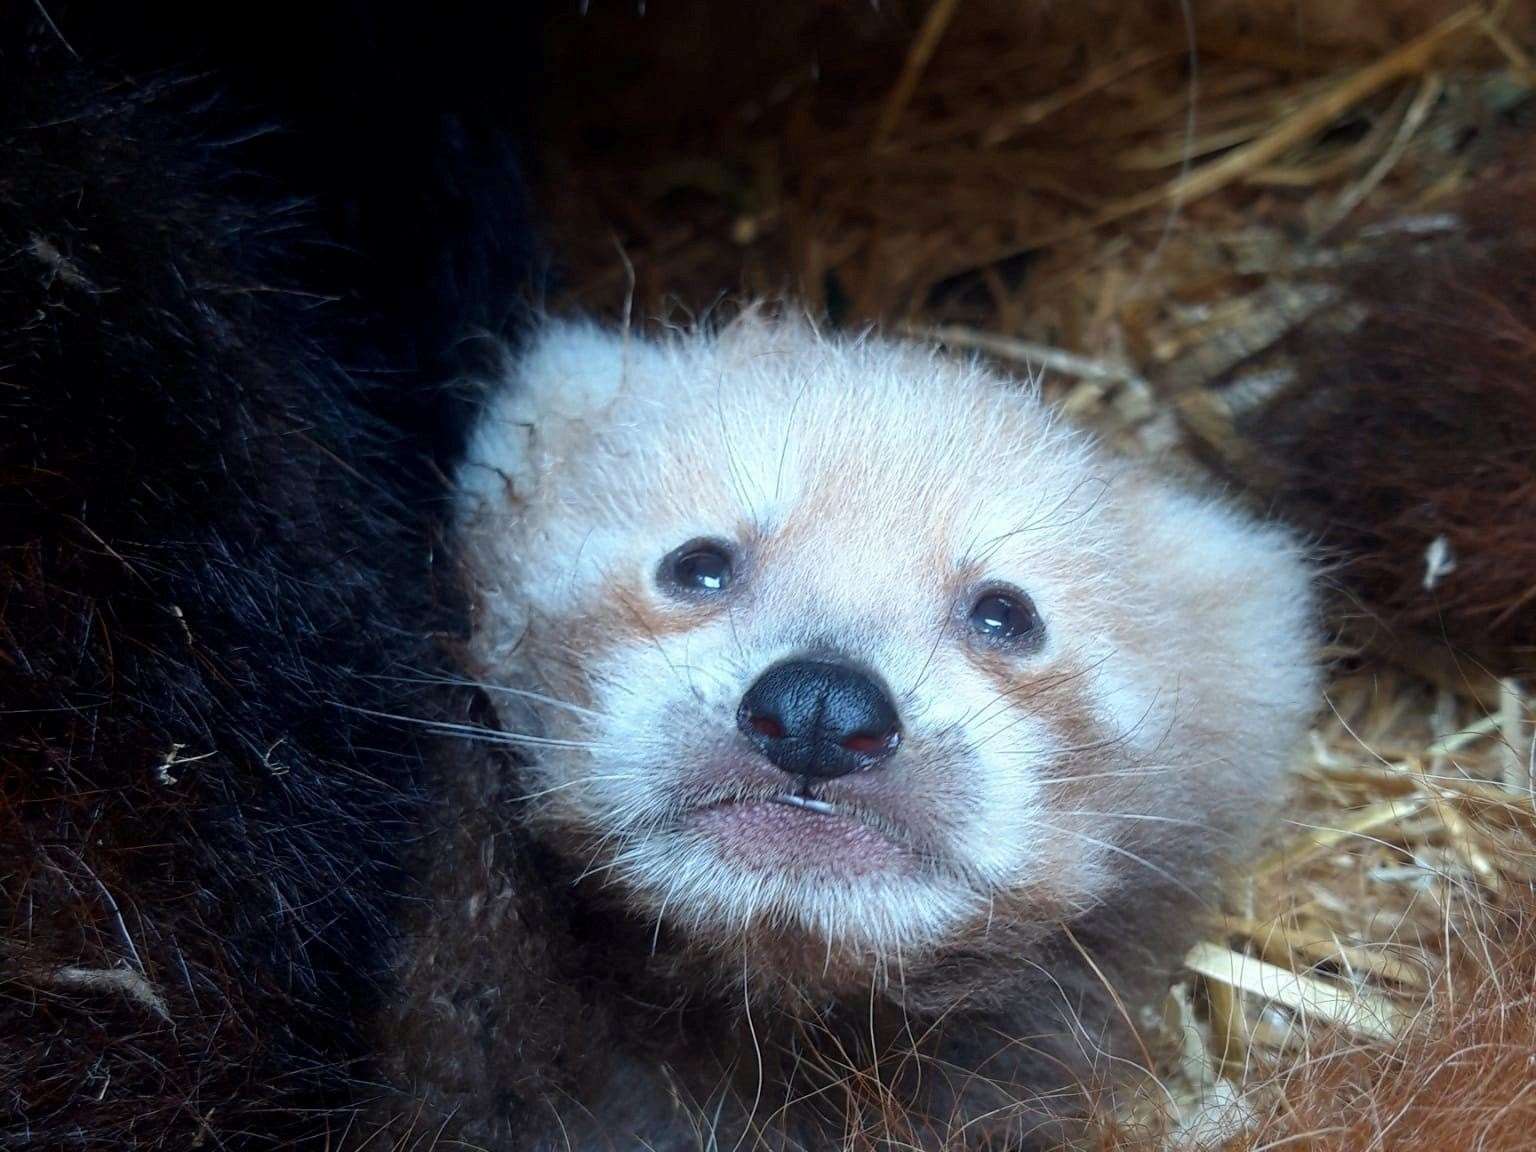 Wingham Wildlife Park shared the sad news of the passing of baby red panda Tai. Picture: Wingham Wildlife Park via Facebook